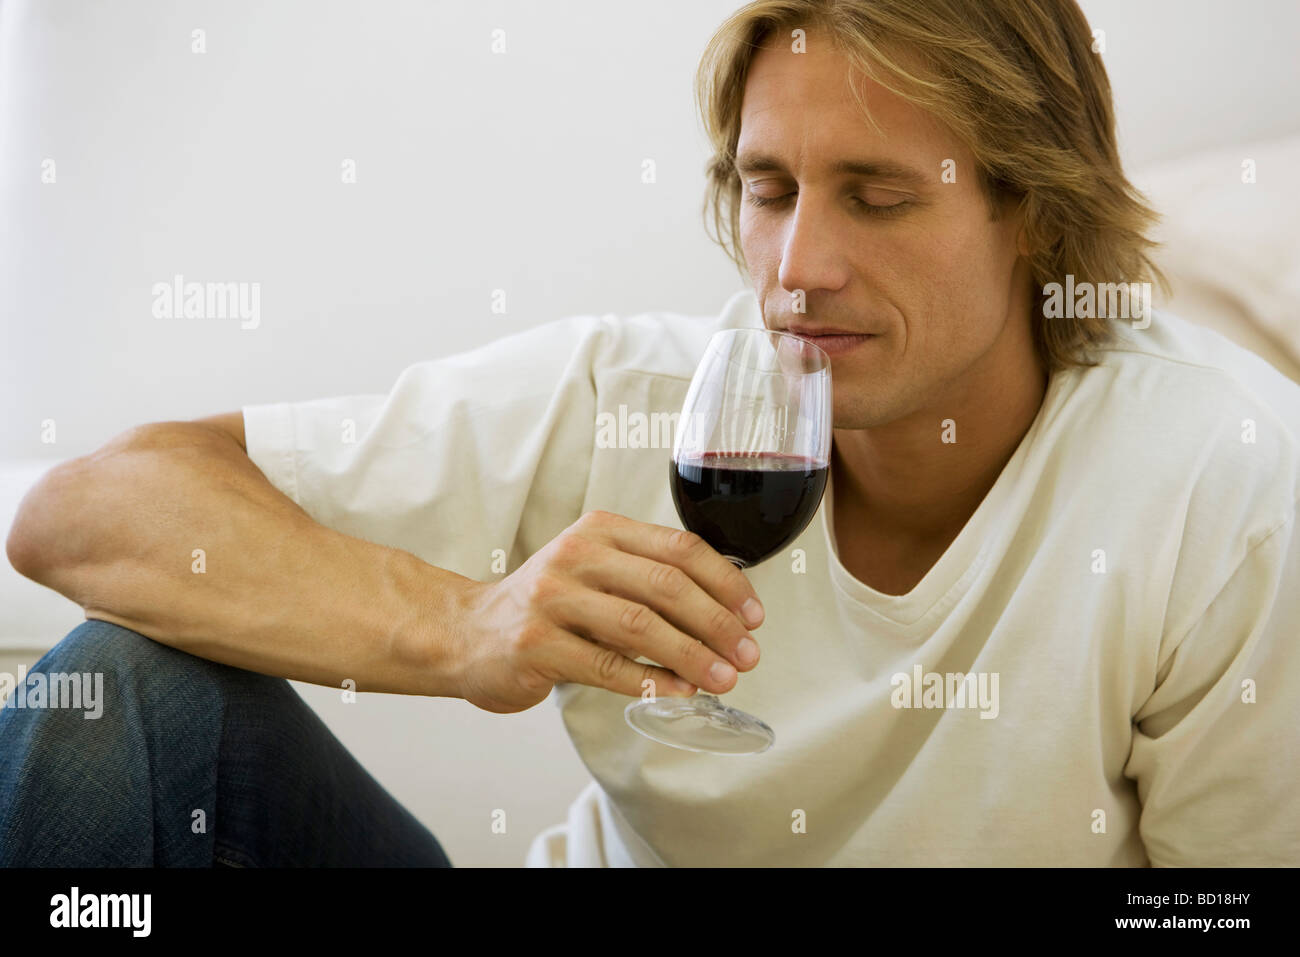 Man enjoying bouquet of glass of red wine Stock Photo